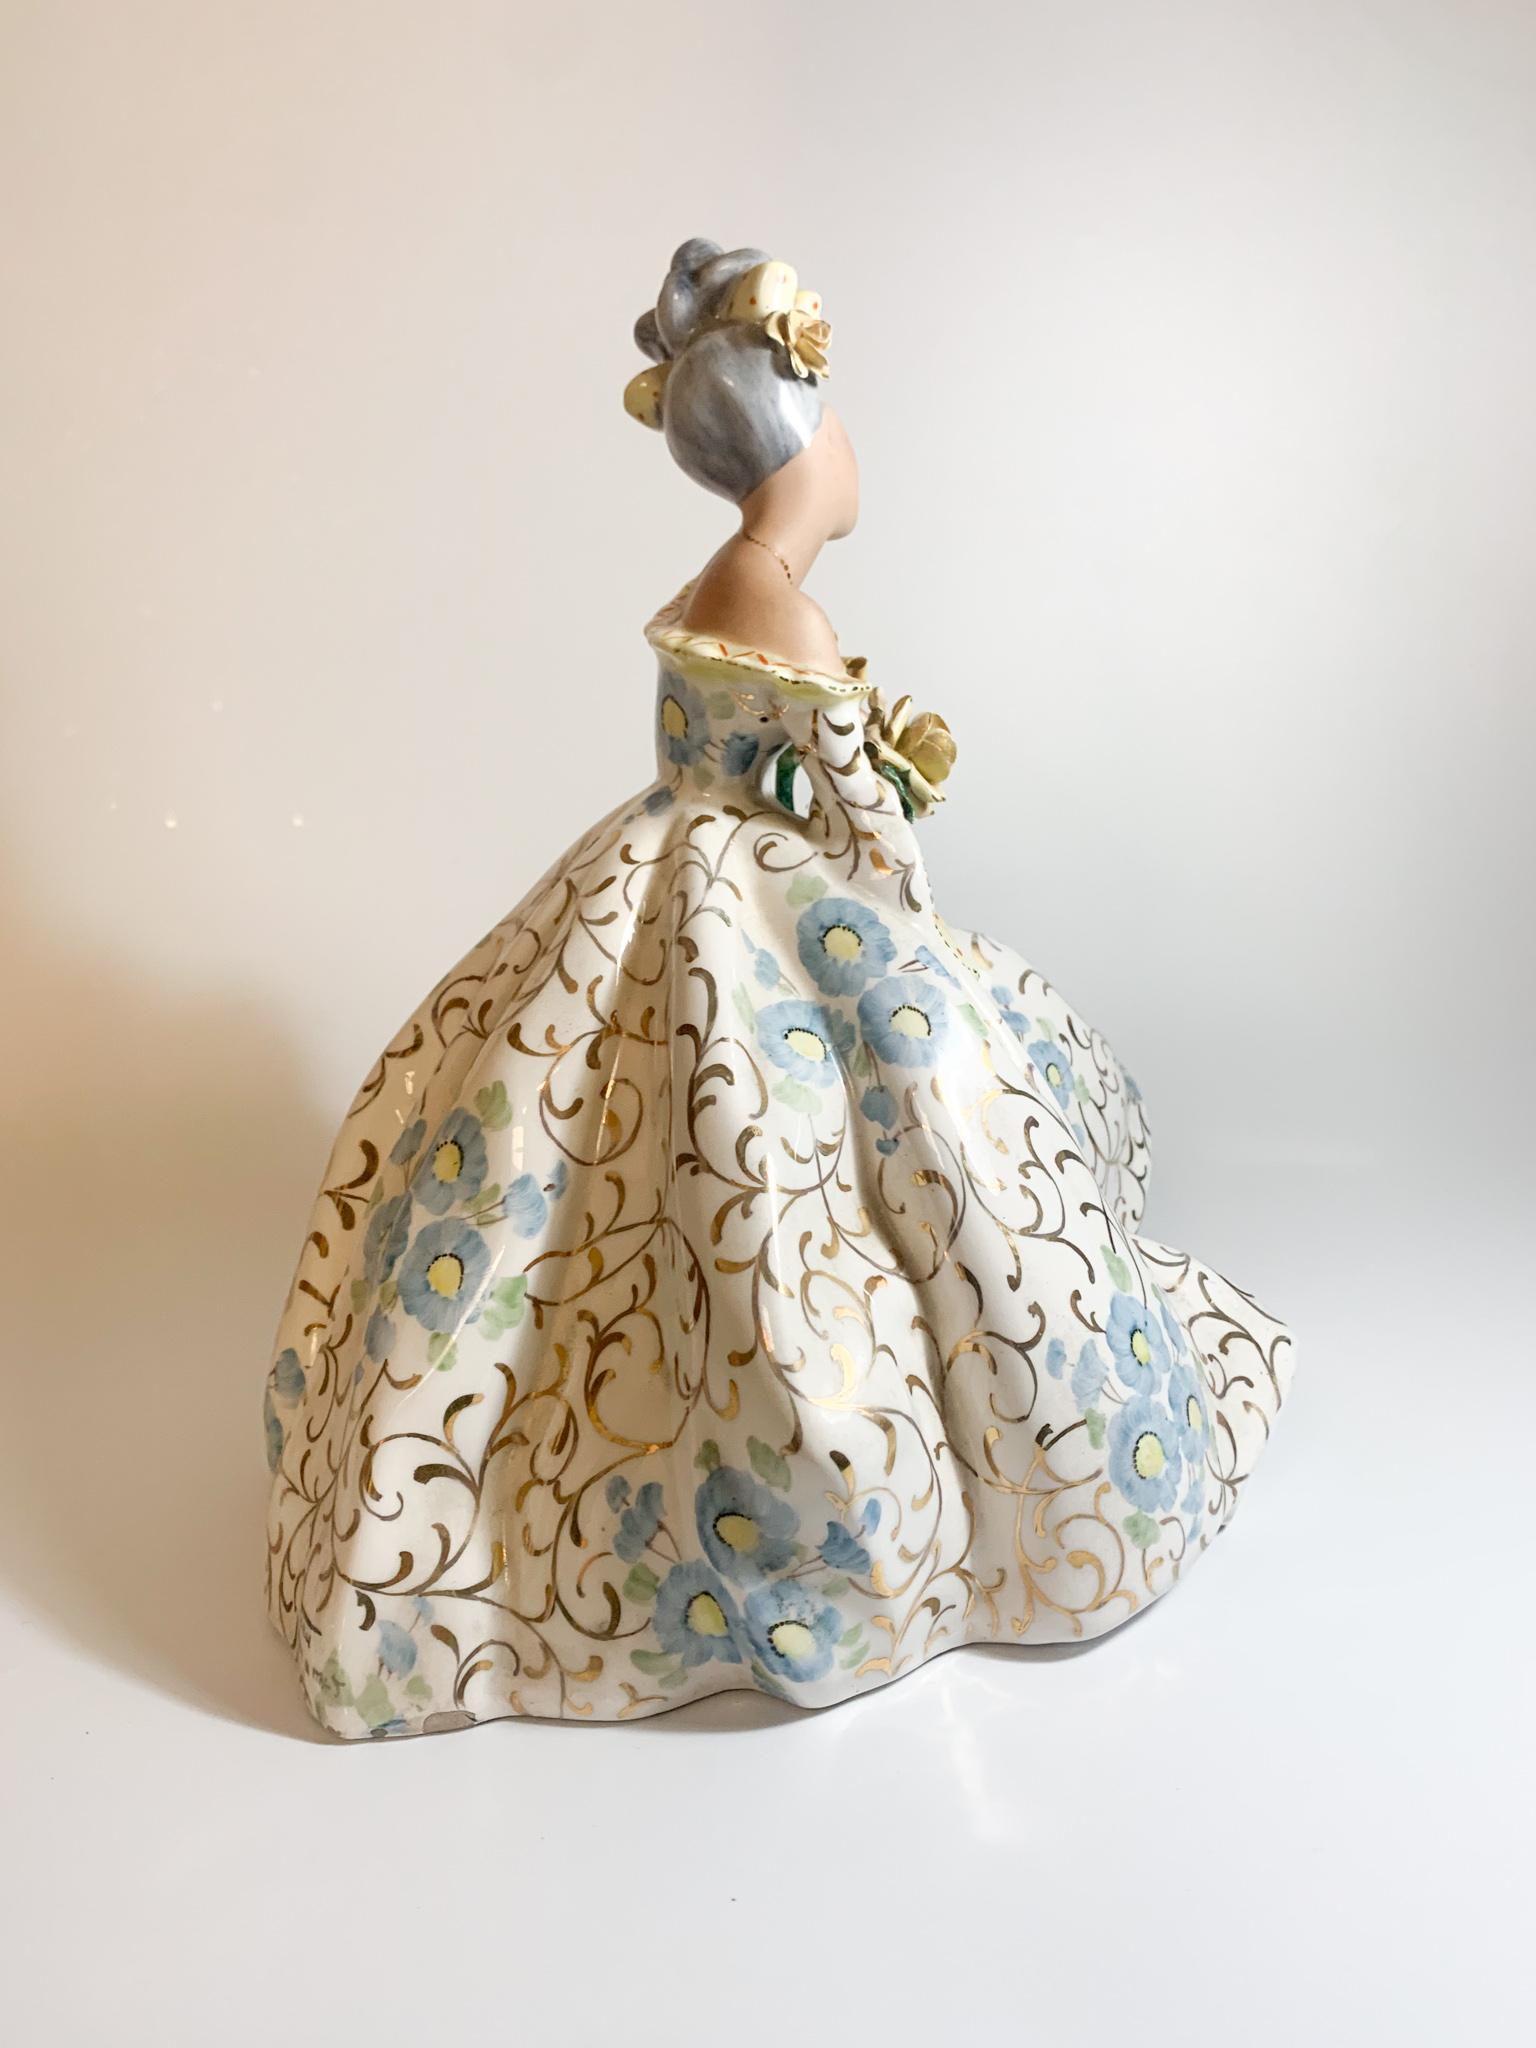 Mid-20th Century Ceramic Statue of a Lady with Iridescent Details by Tiziano Galli from the 1950s For Sale